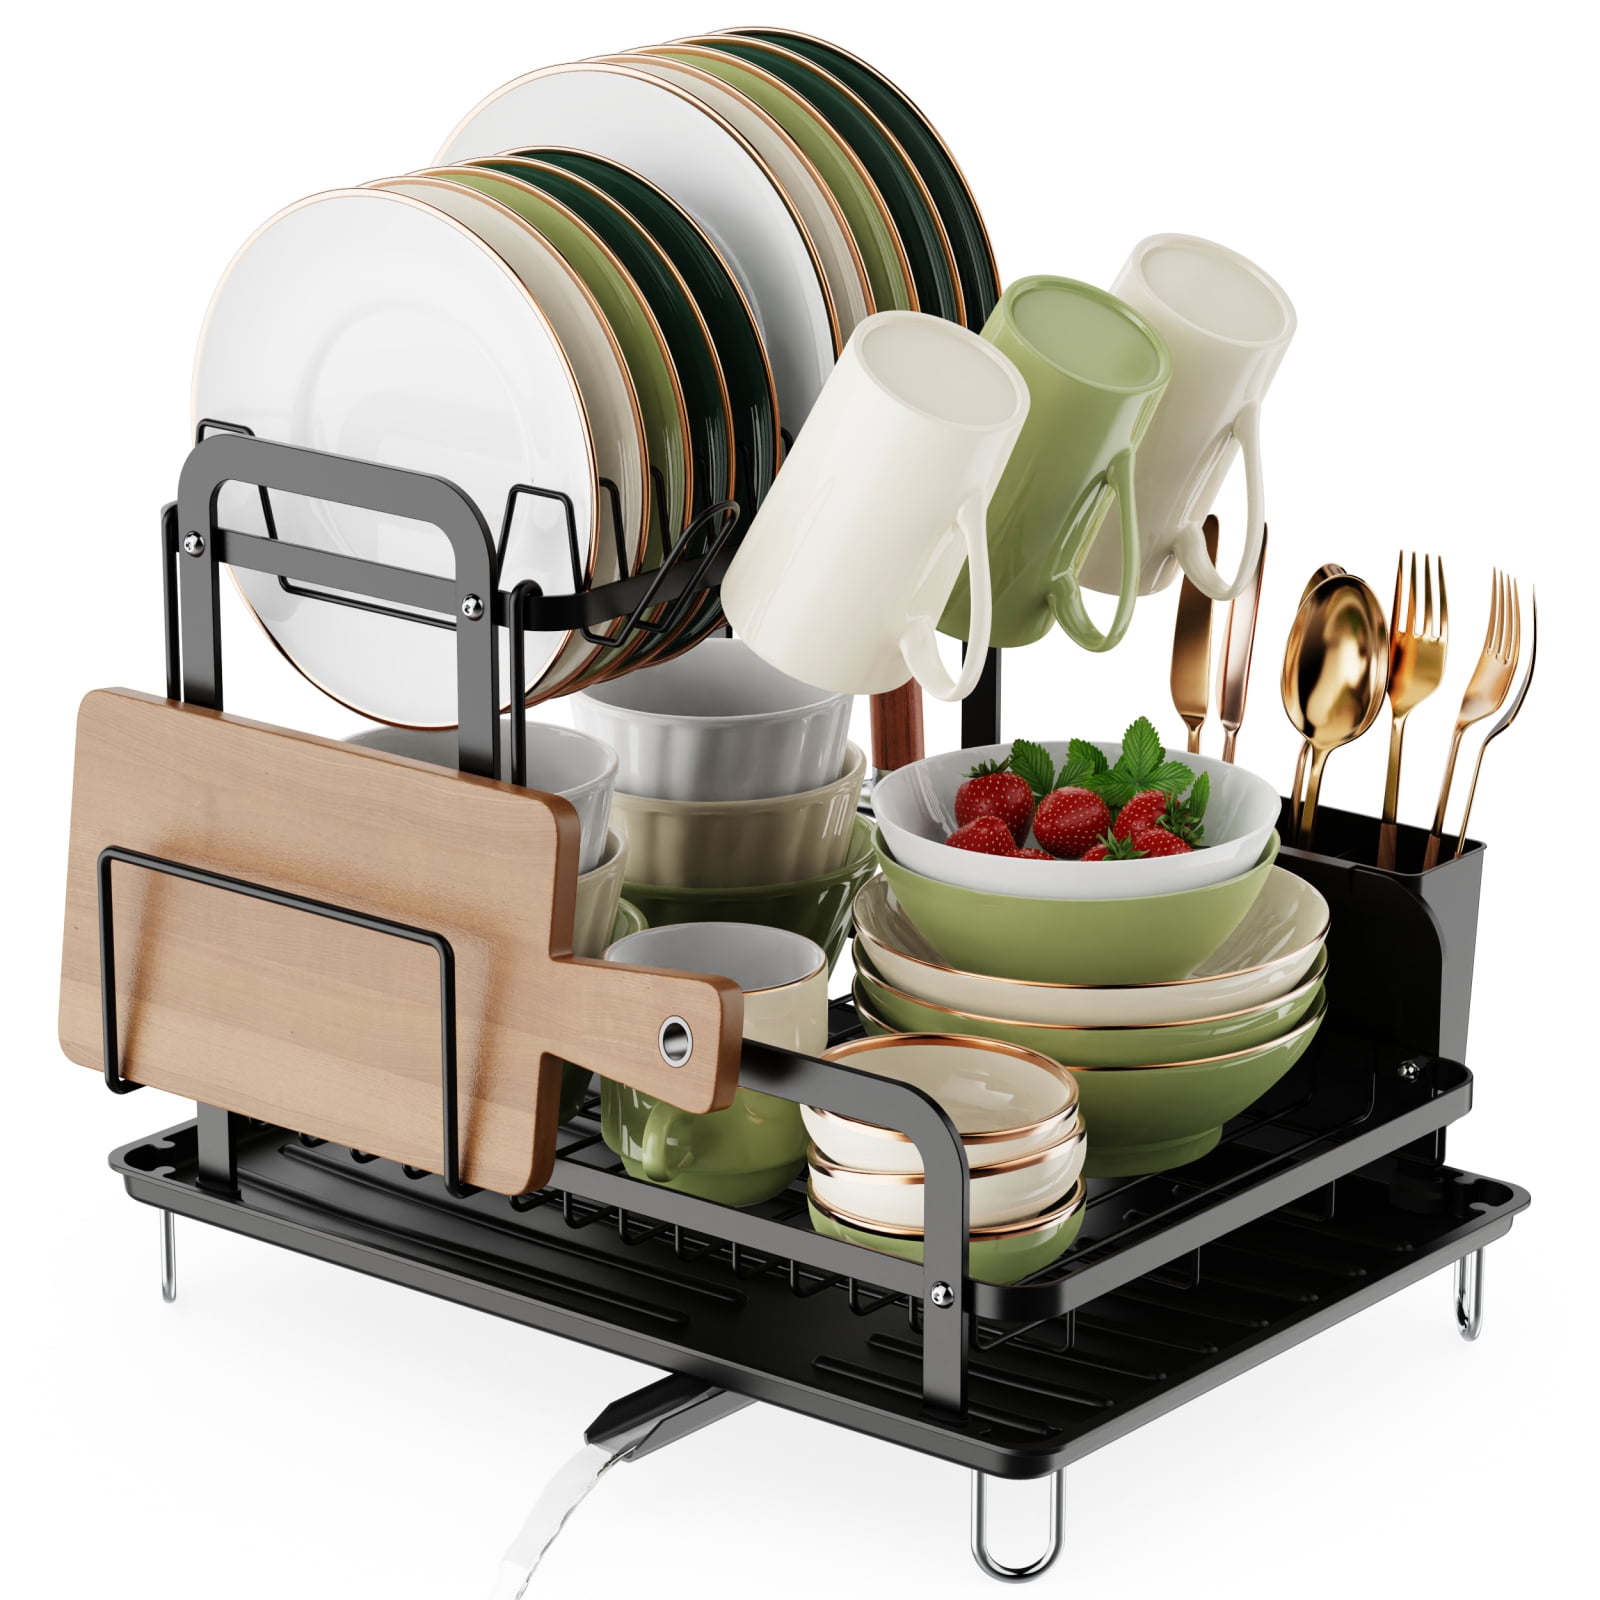  GSlife Dish Drying Rack with Drainboard - Dish Racks for  Kitchen Counter, Rust-Resistant Compact Dish Drainer with Utensil Holder,  Drain Spout and High Feet on Drip Tray, Black: Home & Kitchen